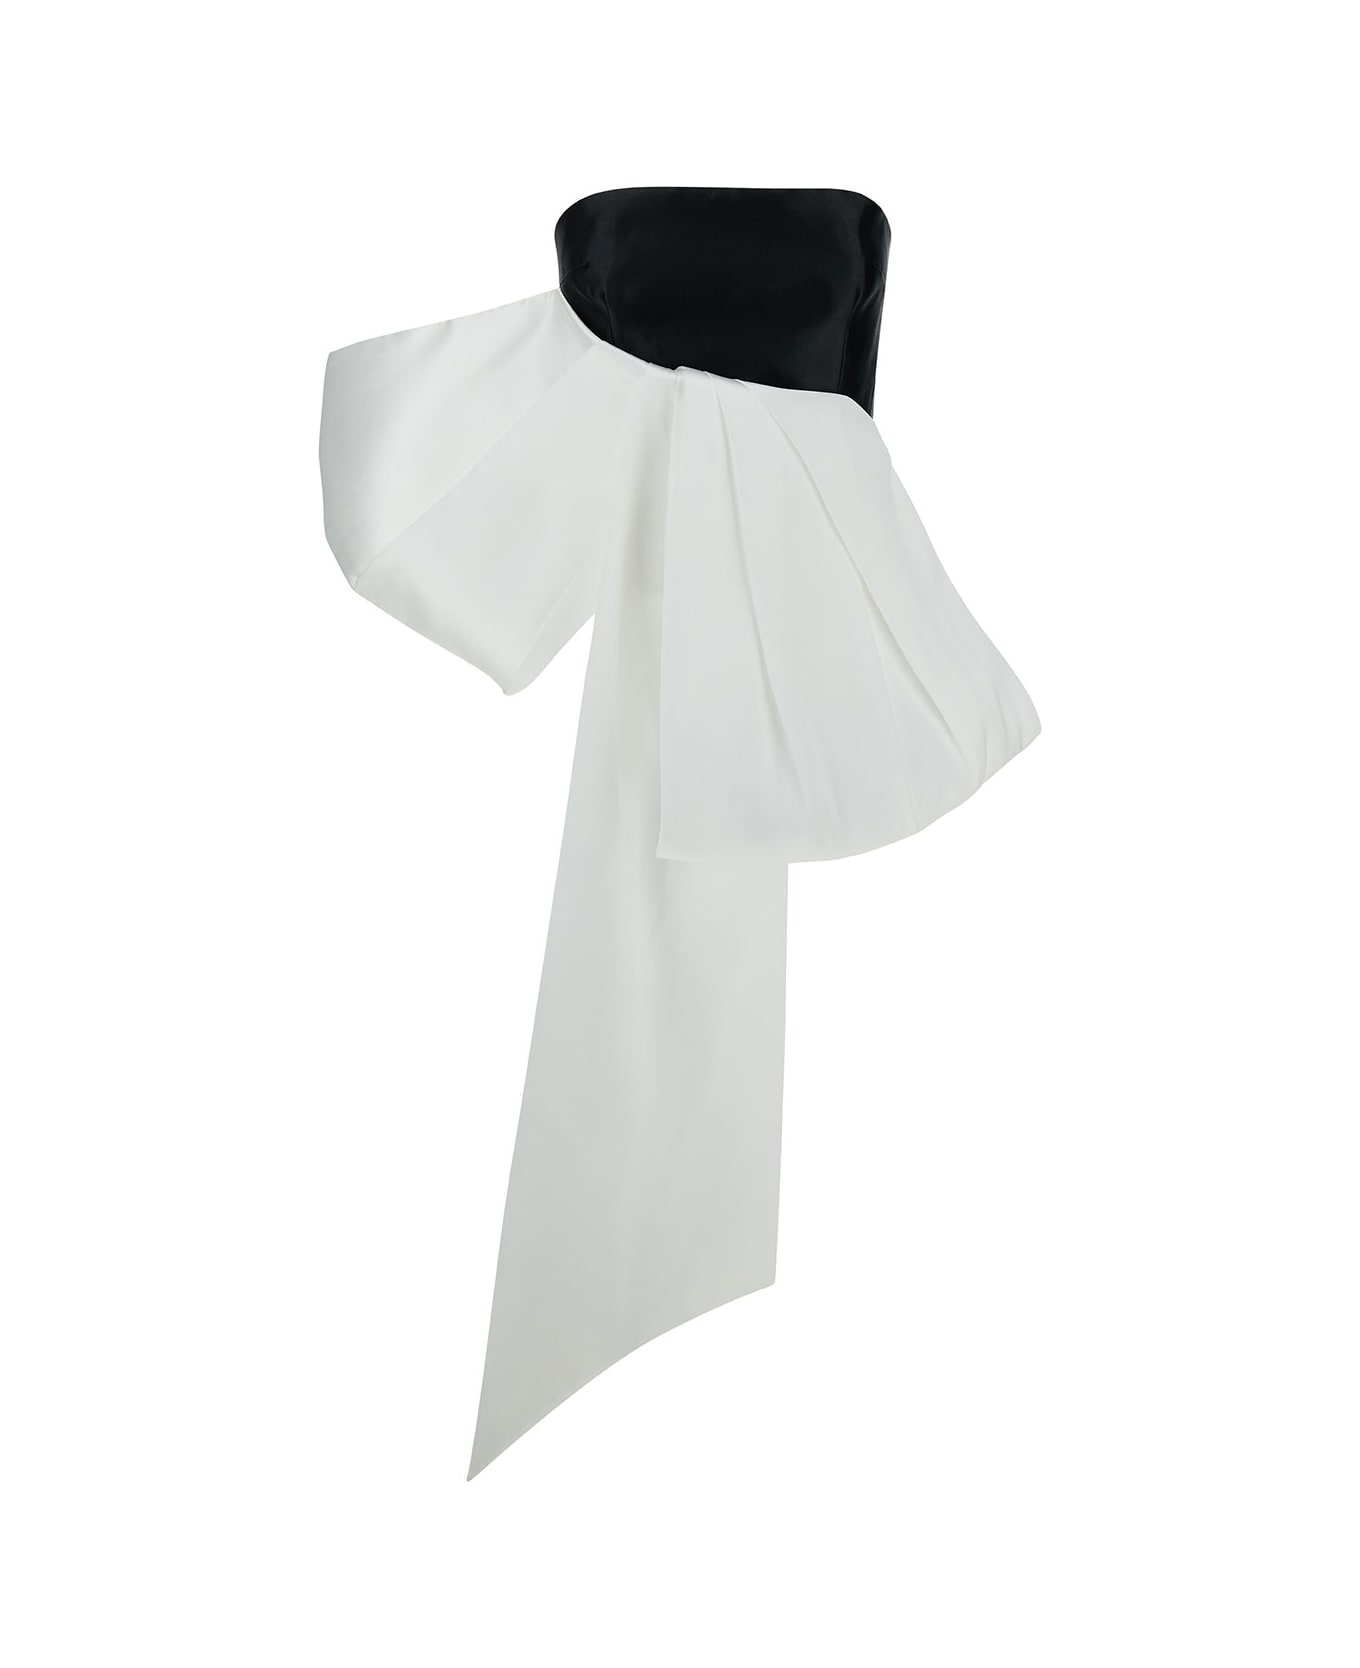 Solace London 'nadina' Black And White Top With Bow Detail In Silk Woman - Black